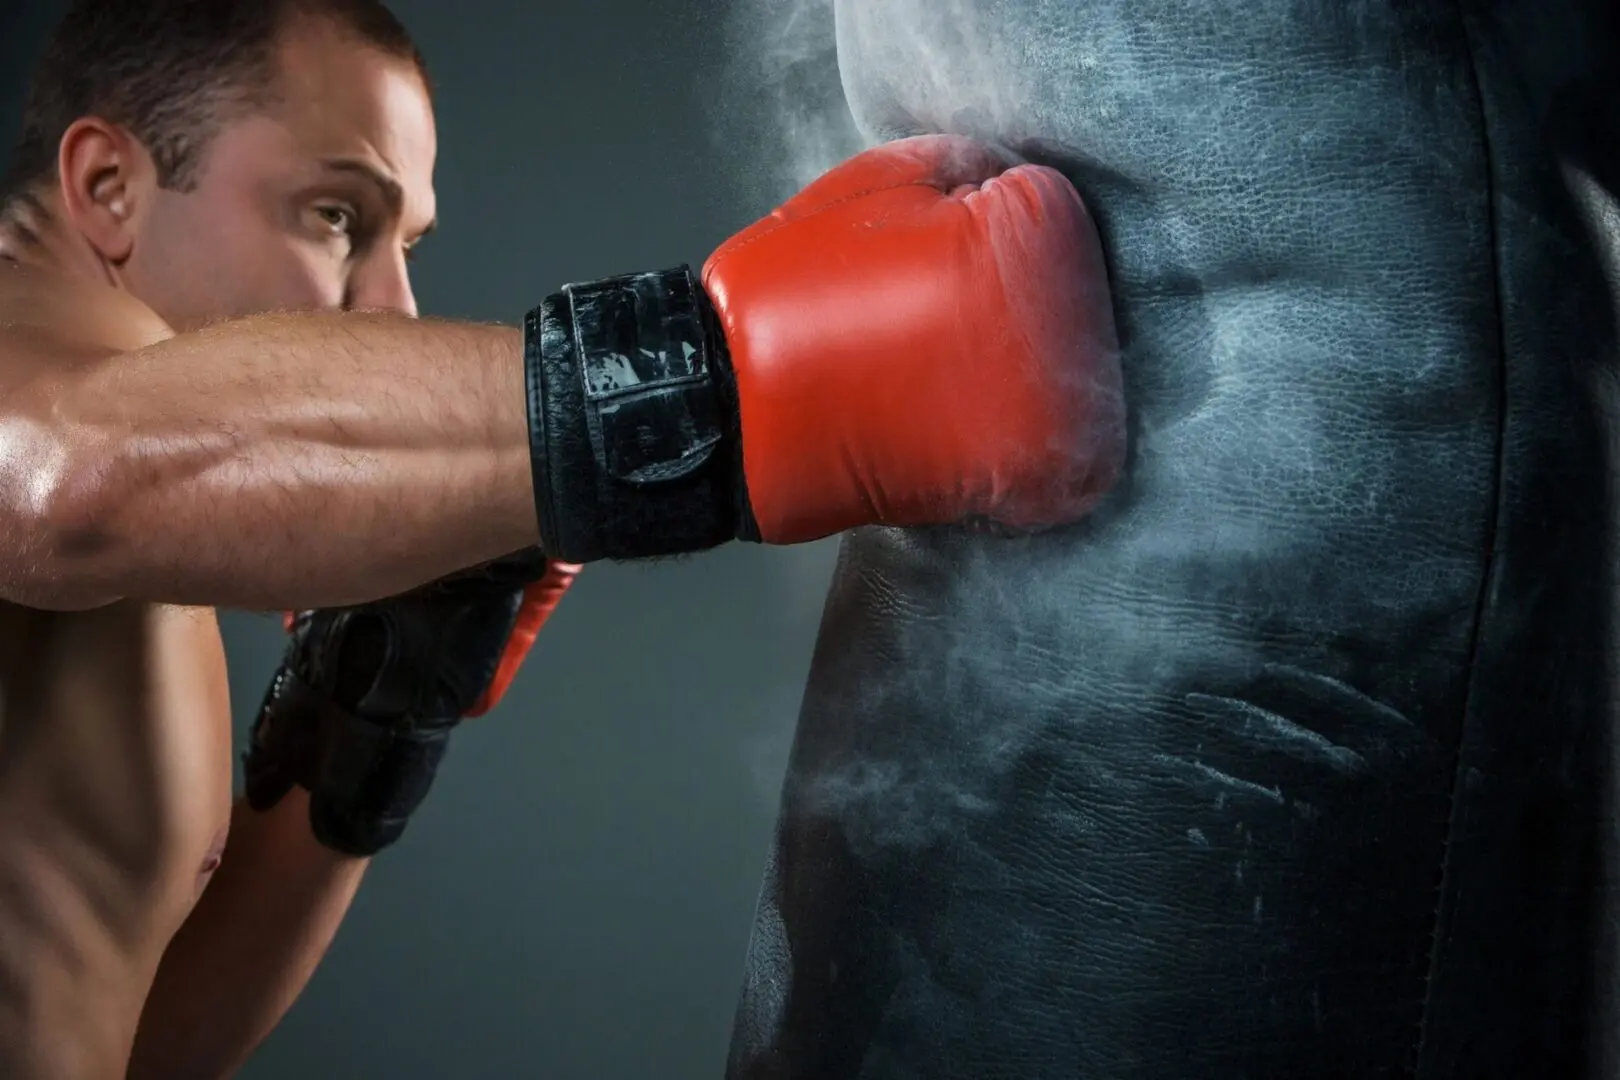 A man wearing red boxing gloves is hitting the wall.